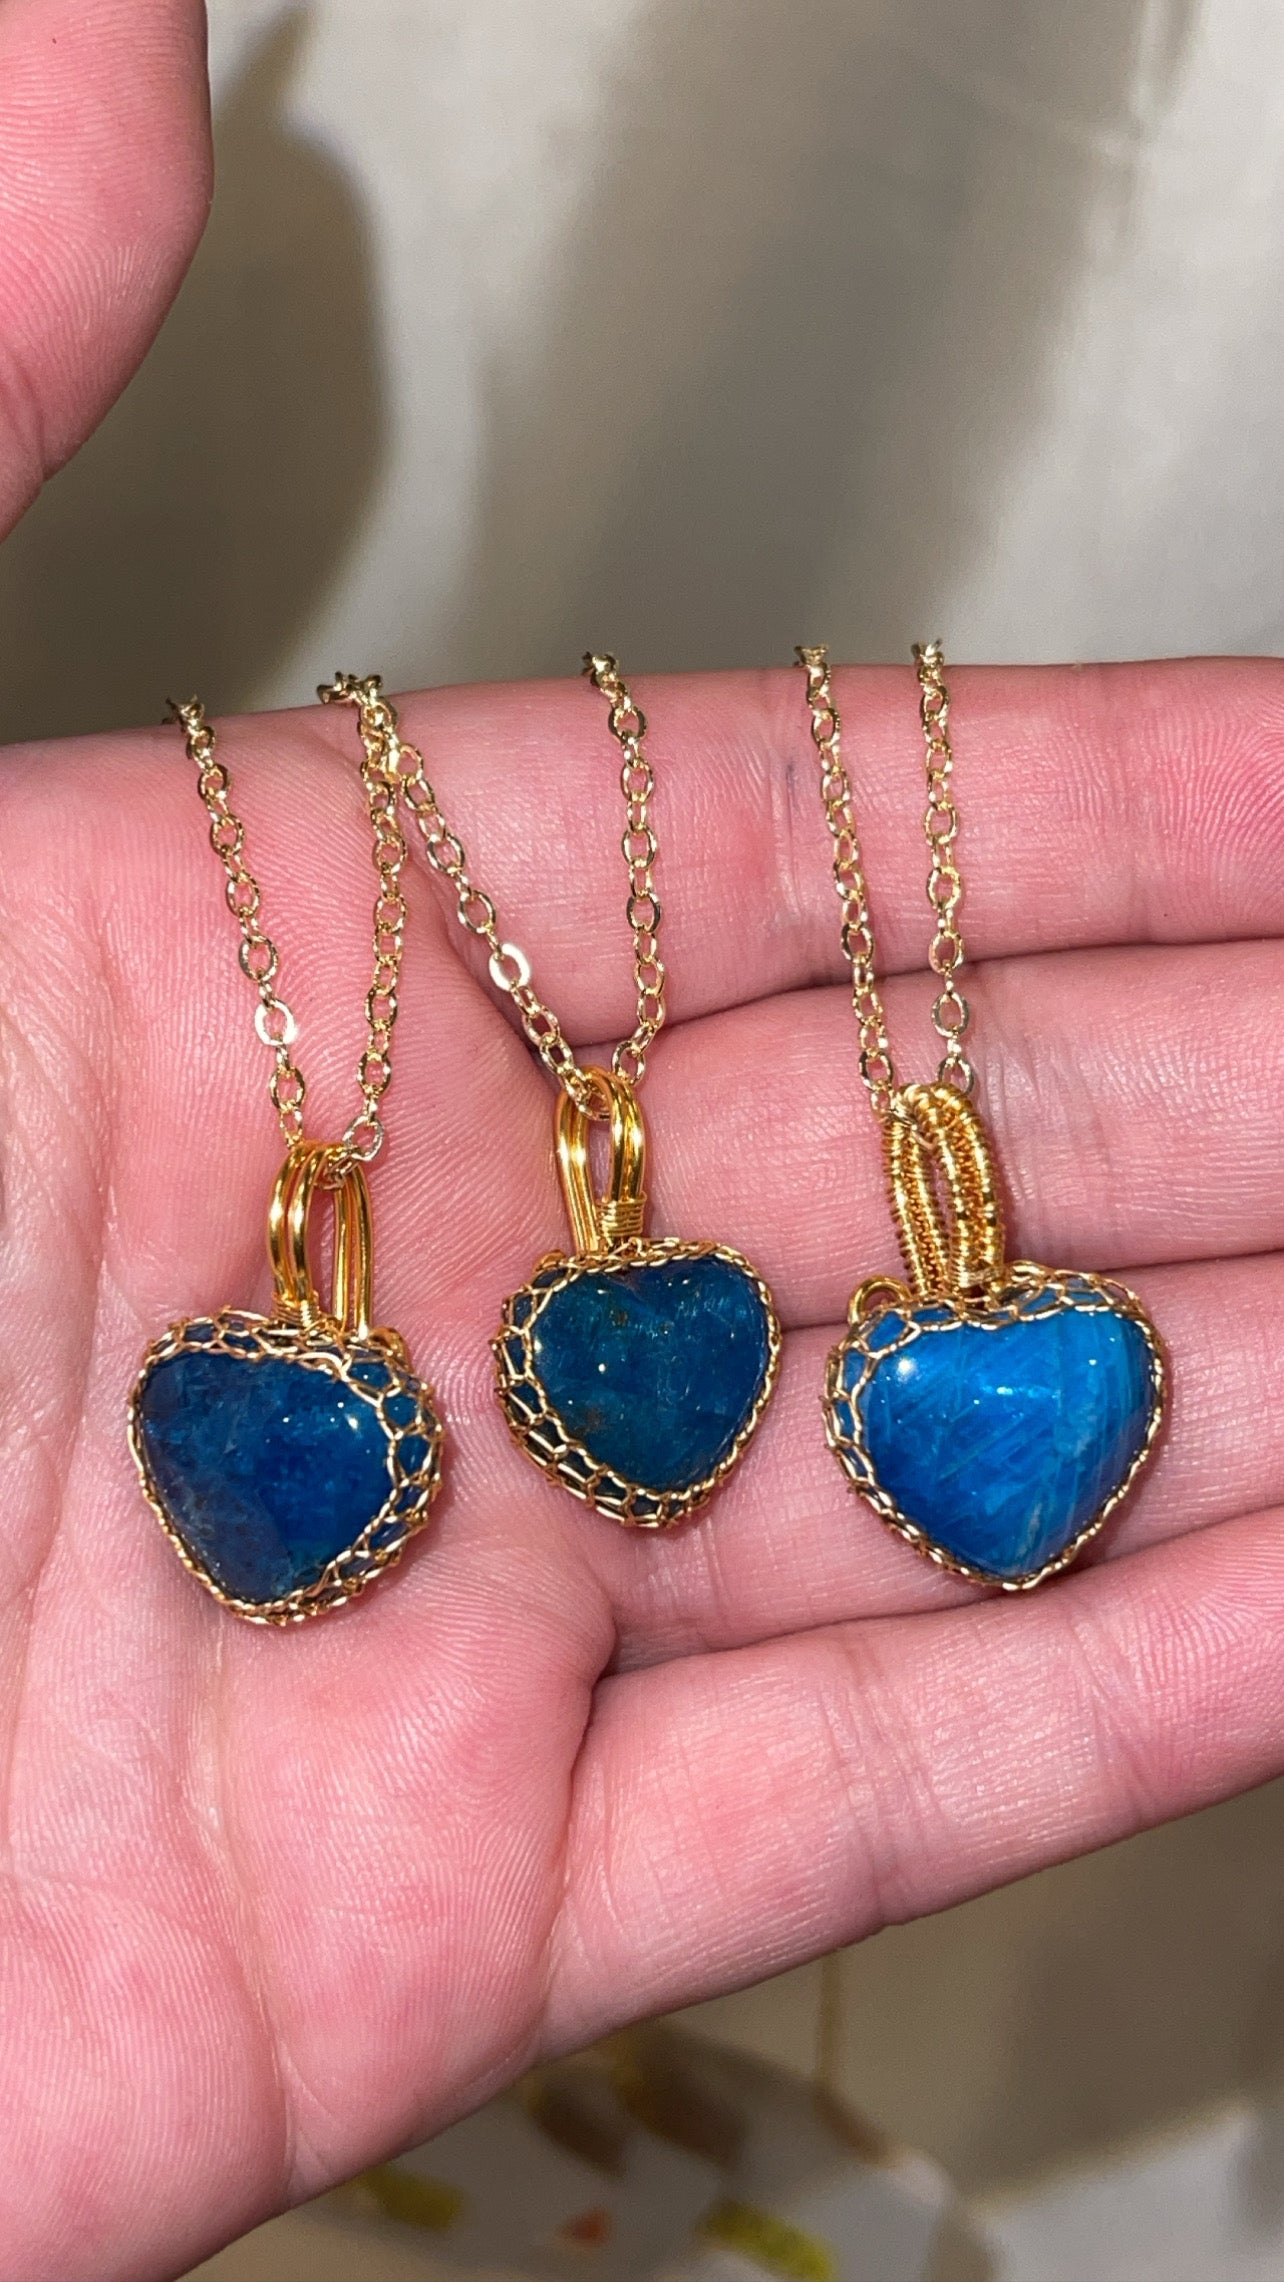 Blue Apatite Heart Necklace Gold